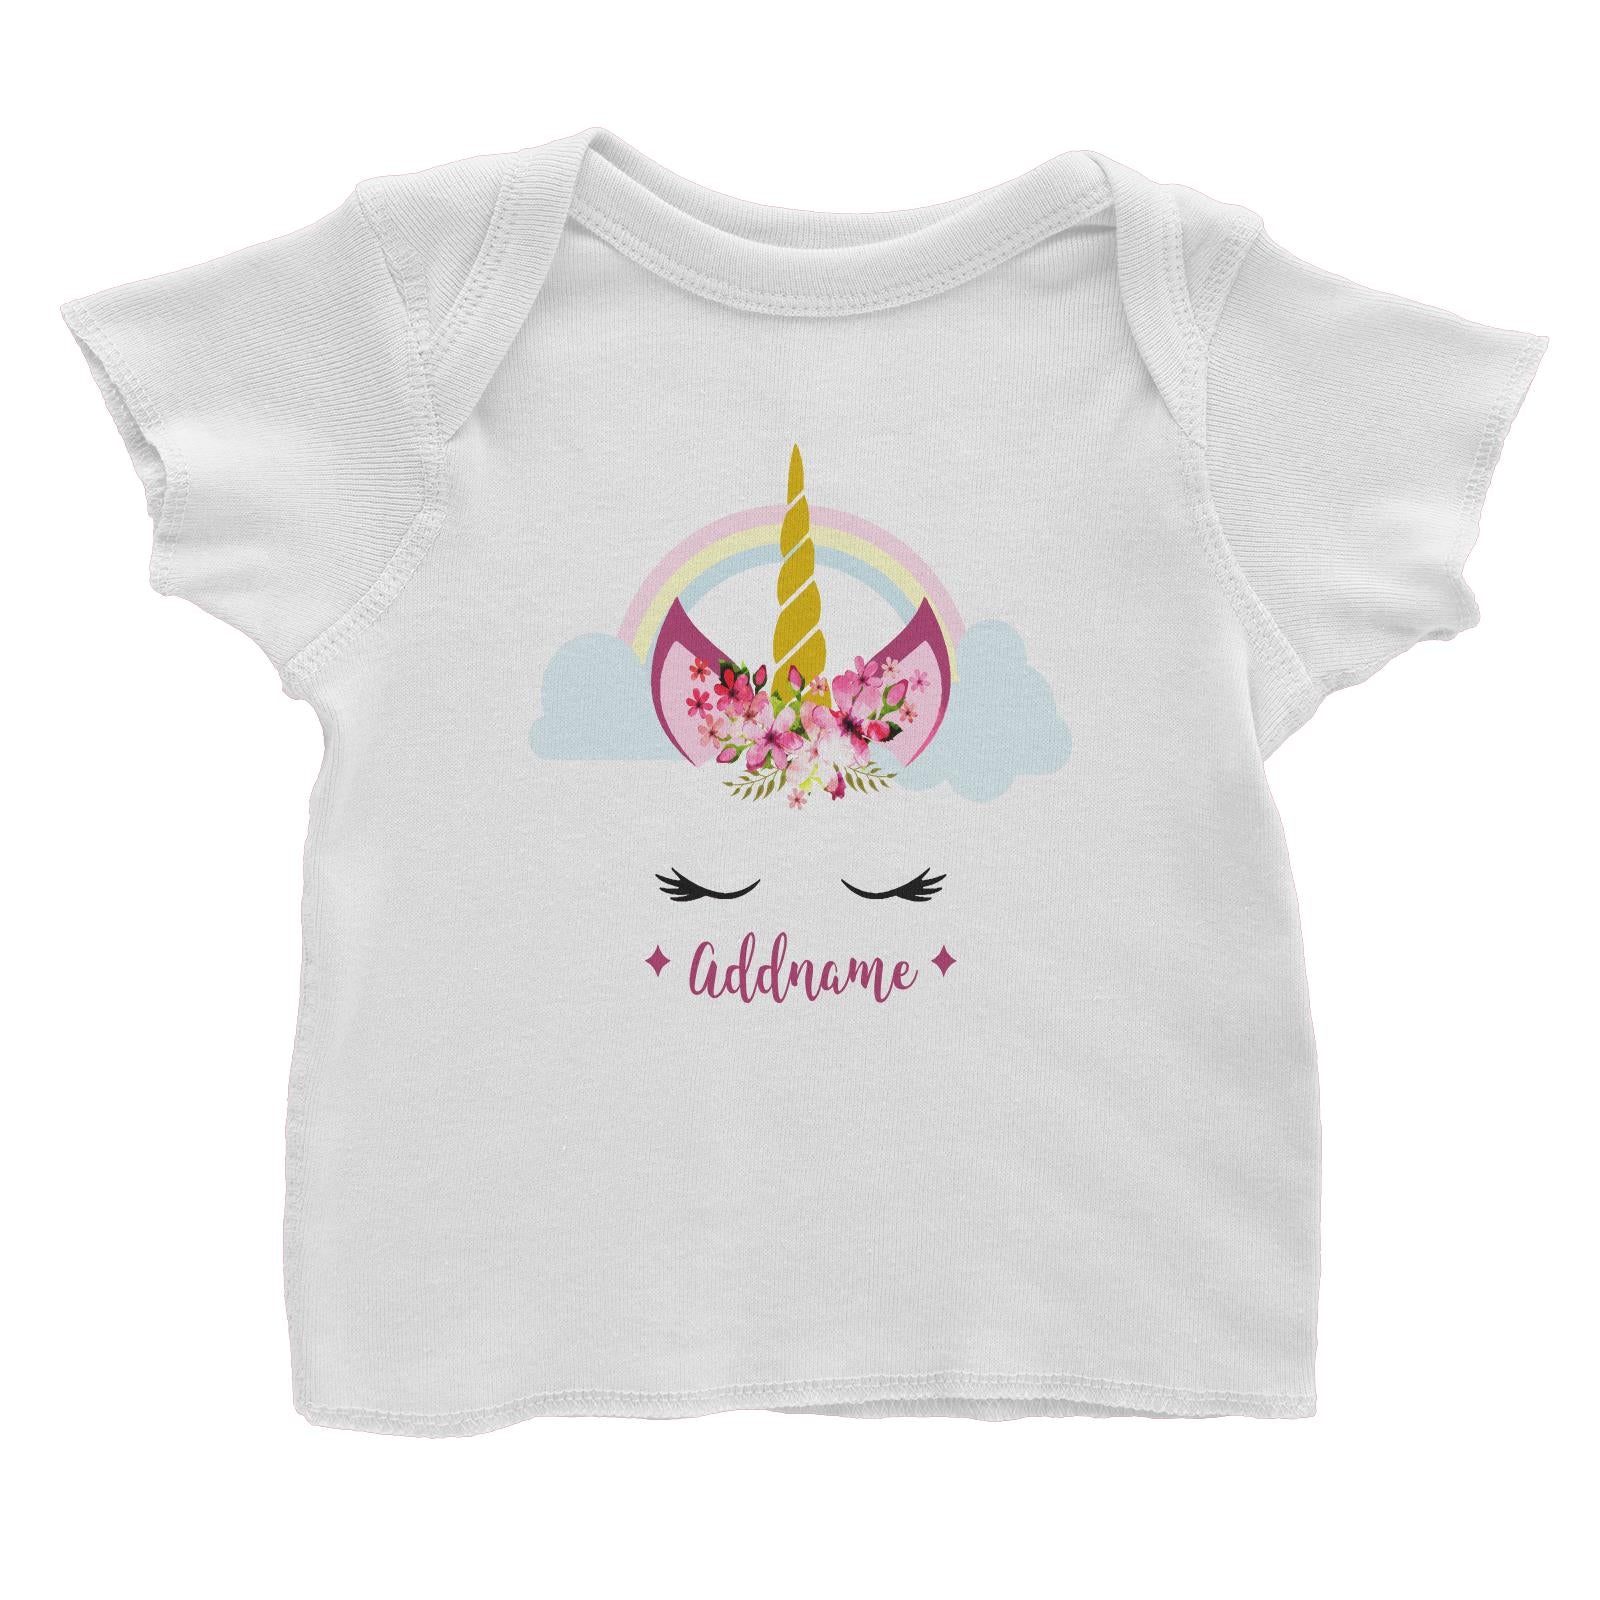 Unicorn Face Girl Addname Baby T-Shirt (FLASH DEAL)